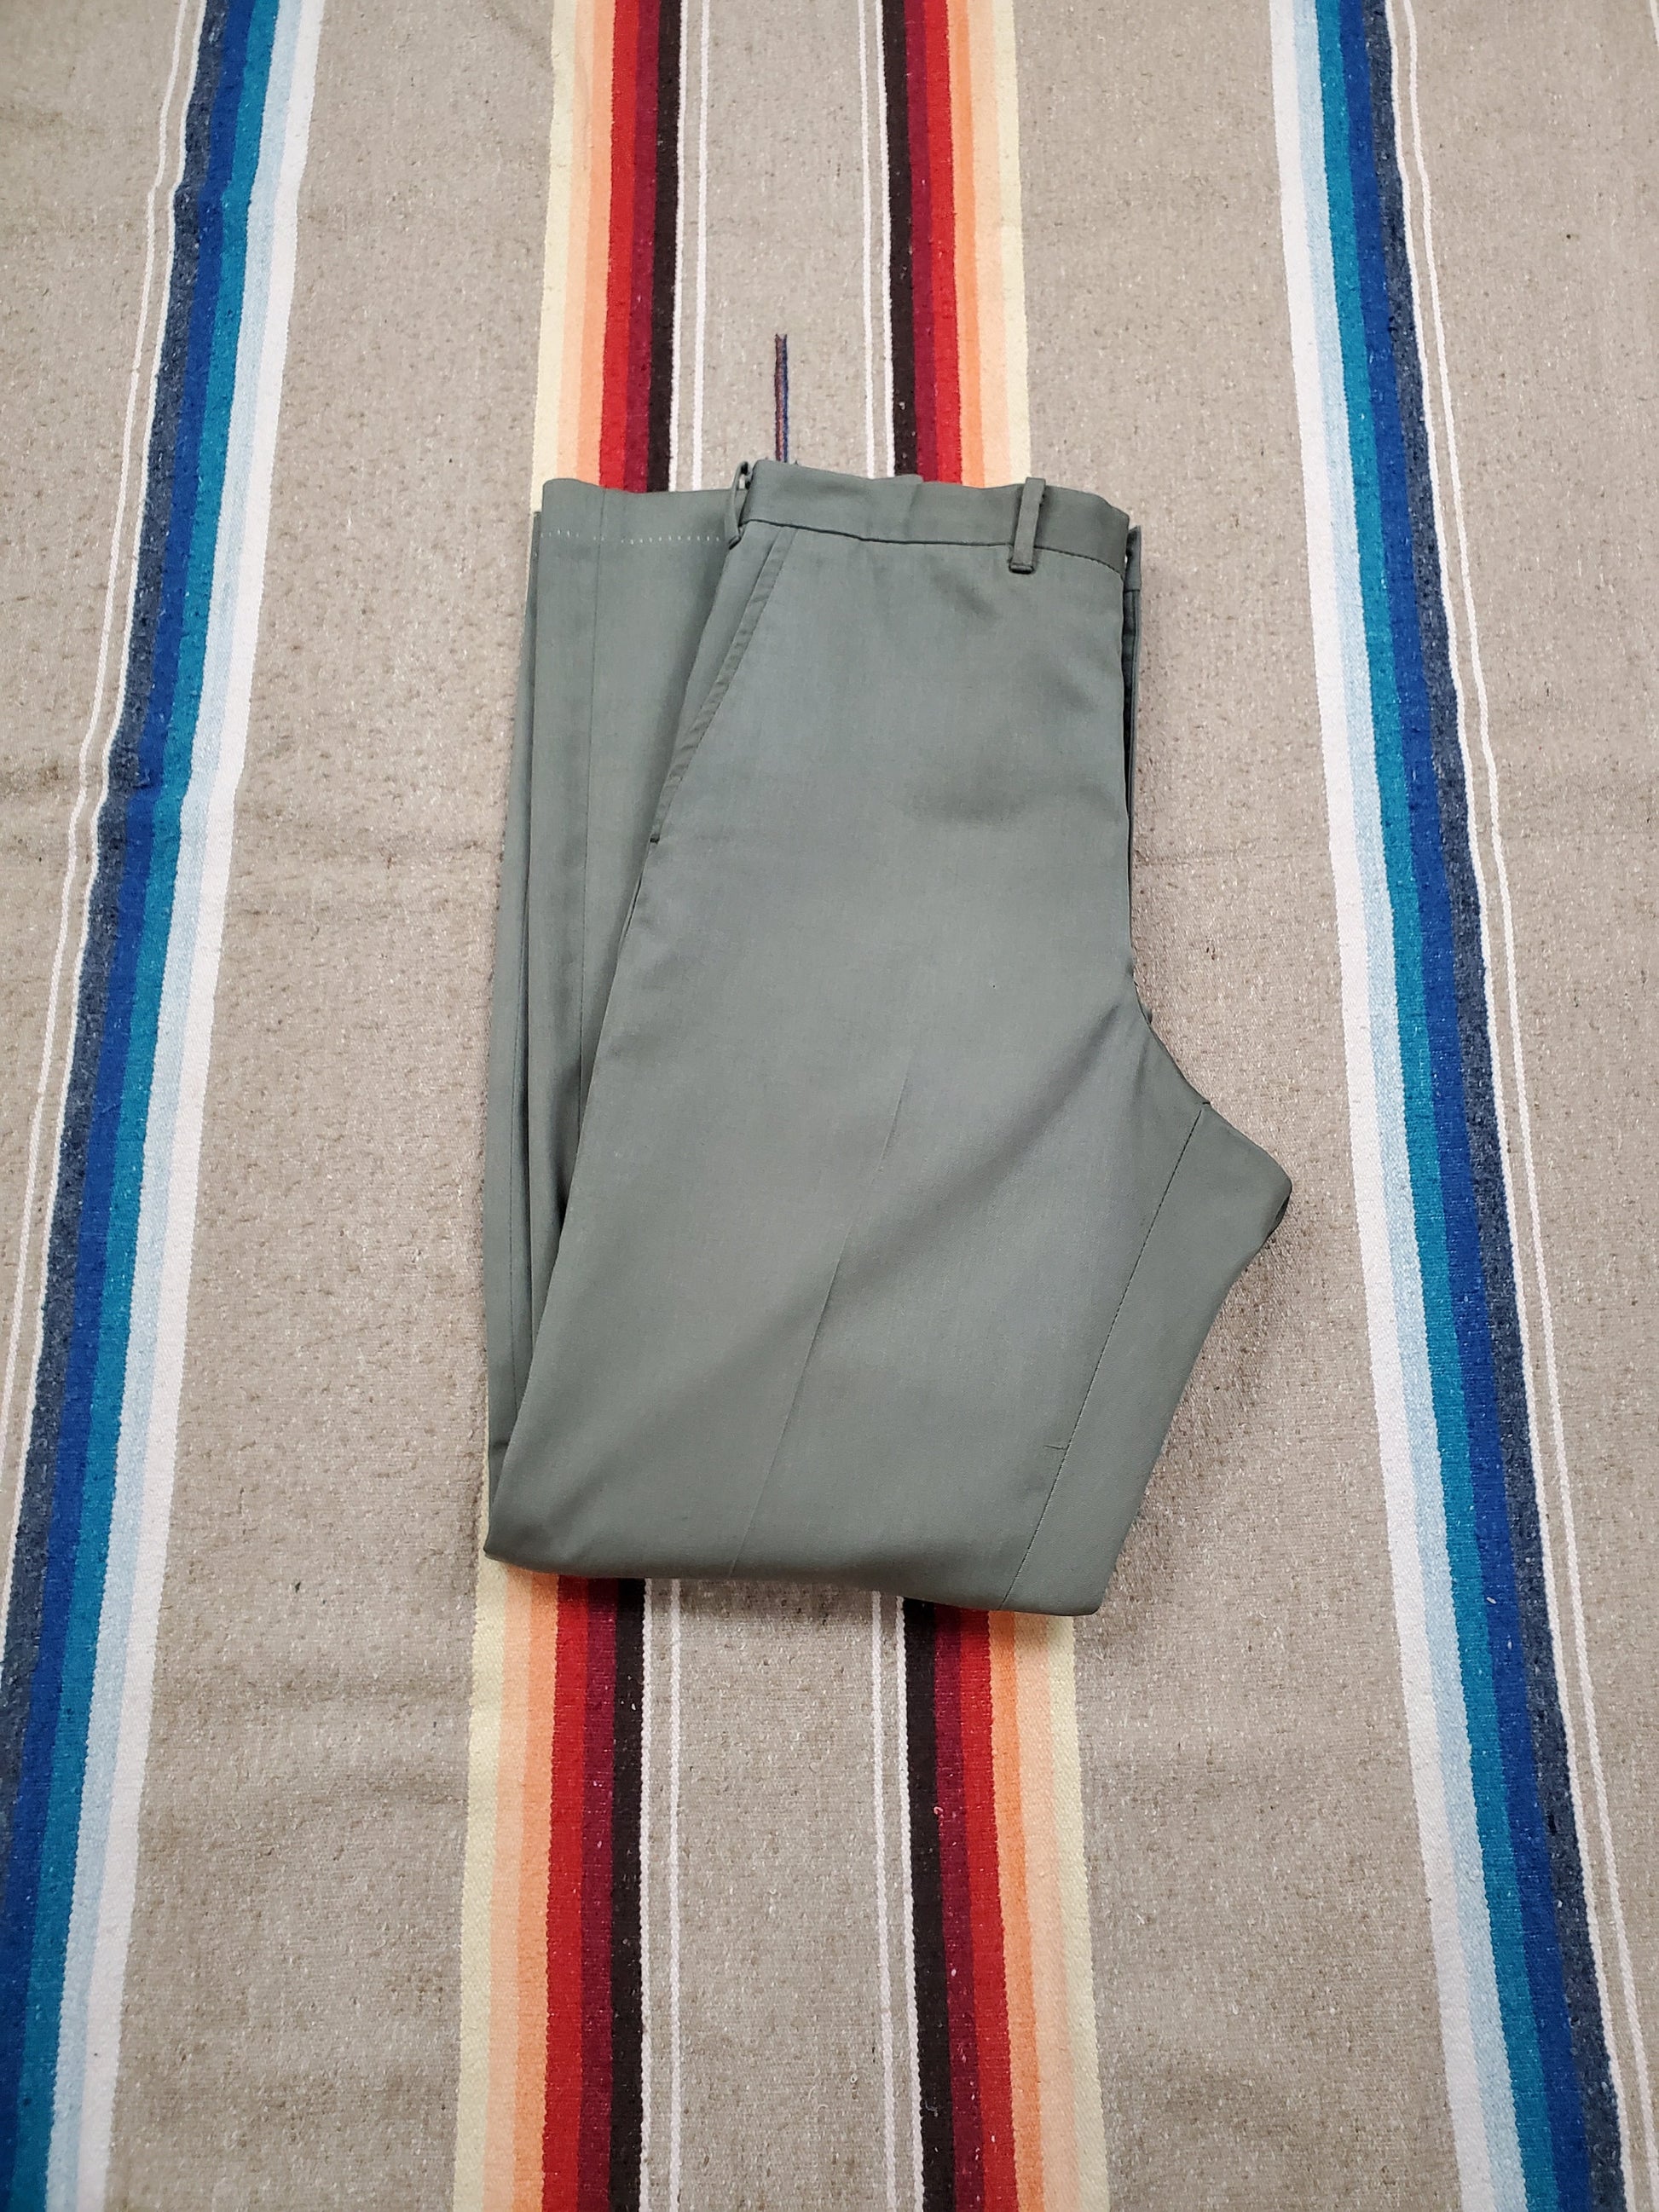 1970s Lee Leesures Lee Prest Permanent Press Pants Made in USA Size 30x30